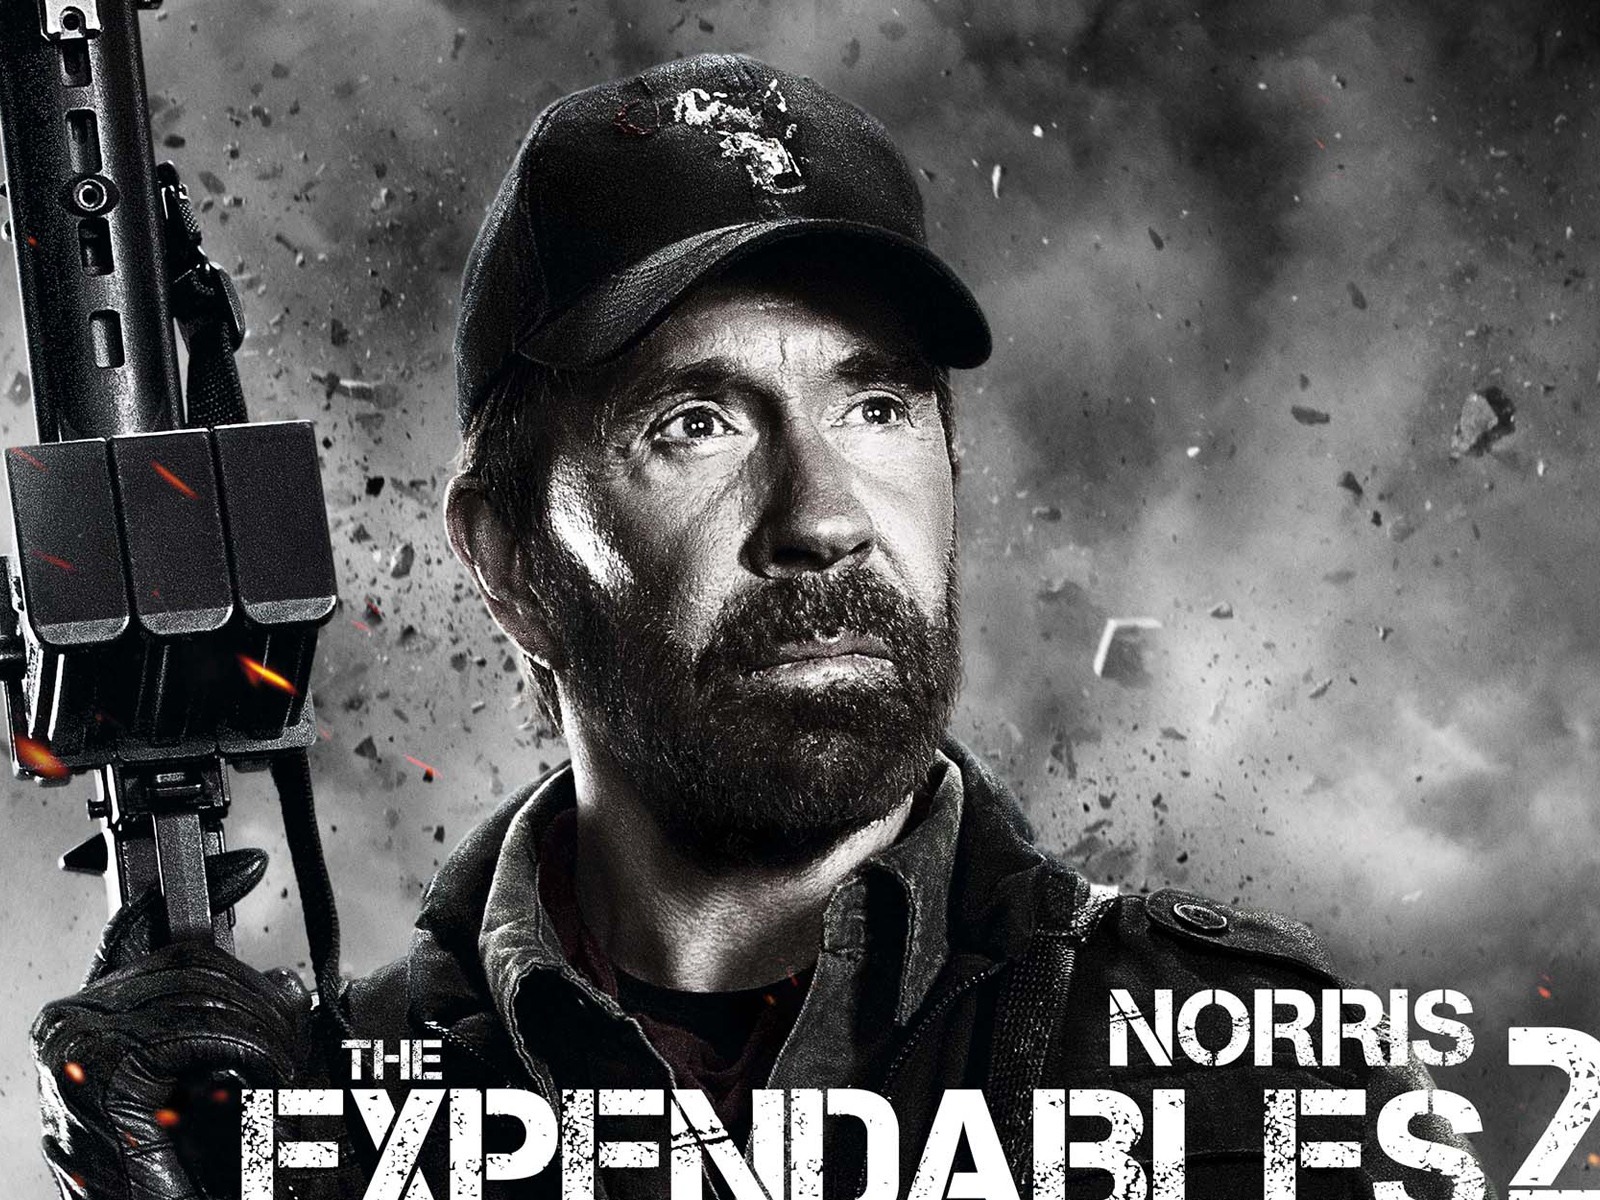 2012 The Expendables 2 敢死队2 高清壁纸13 - 1600x1200